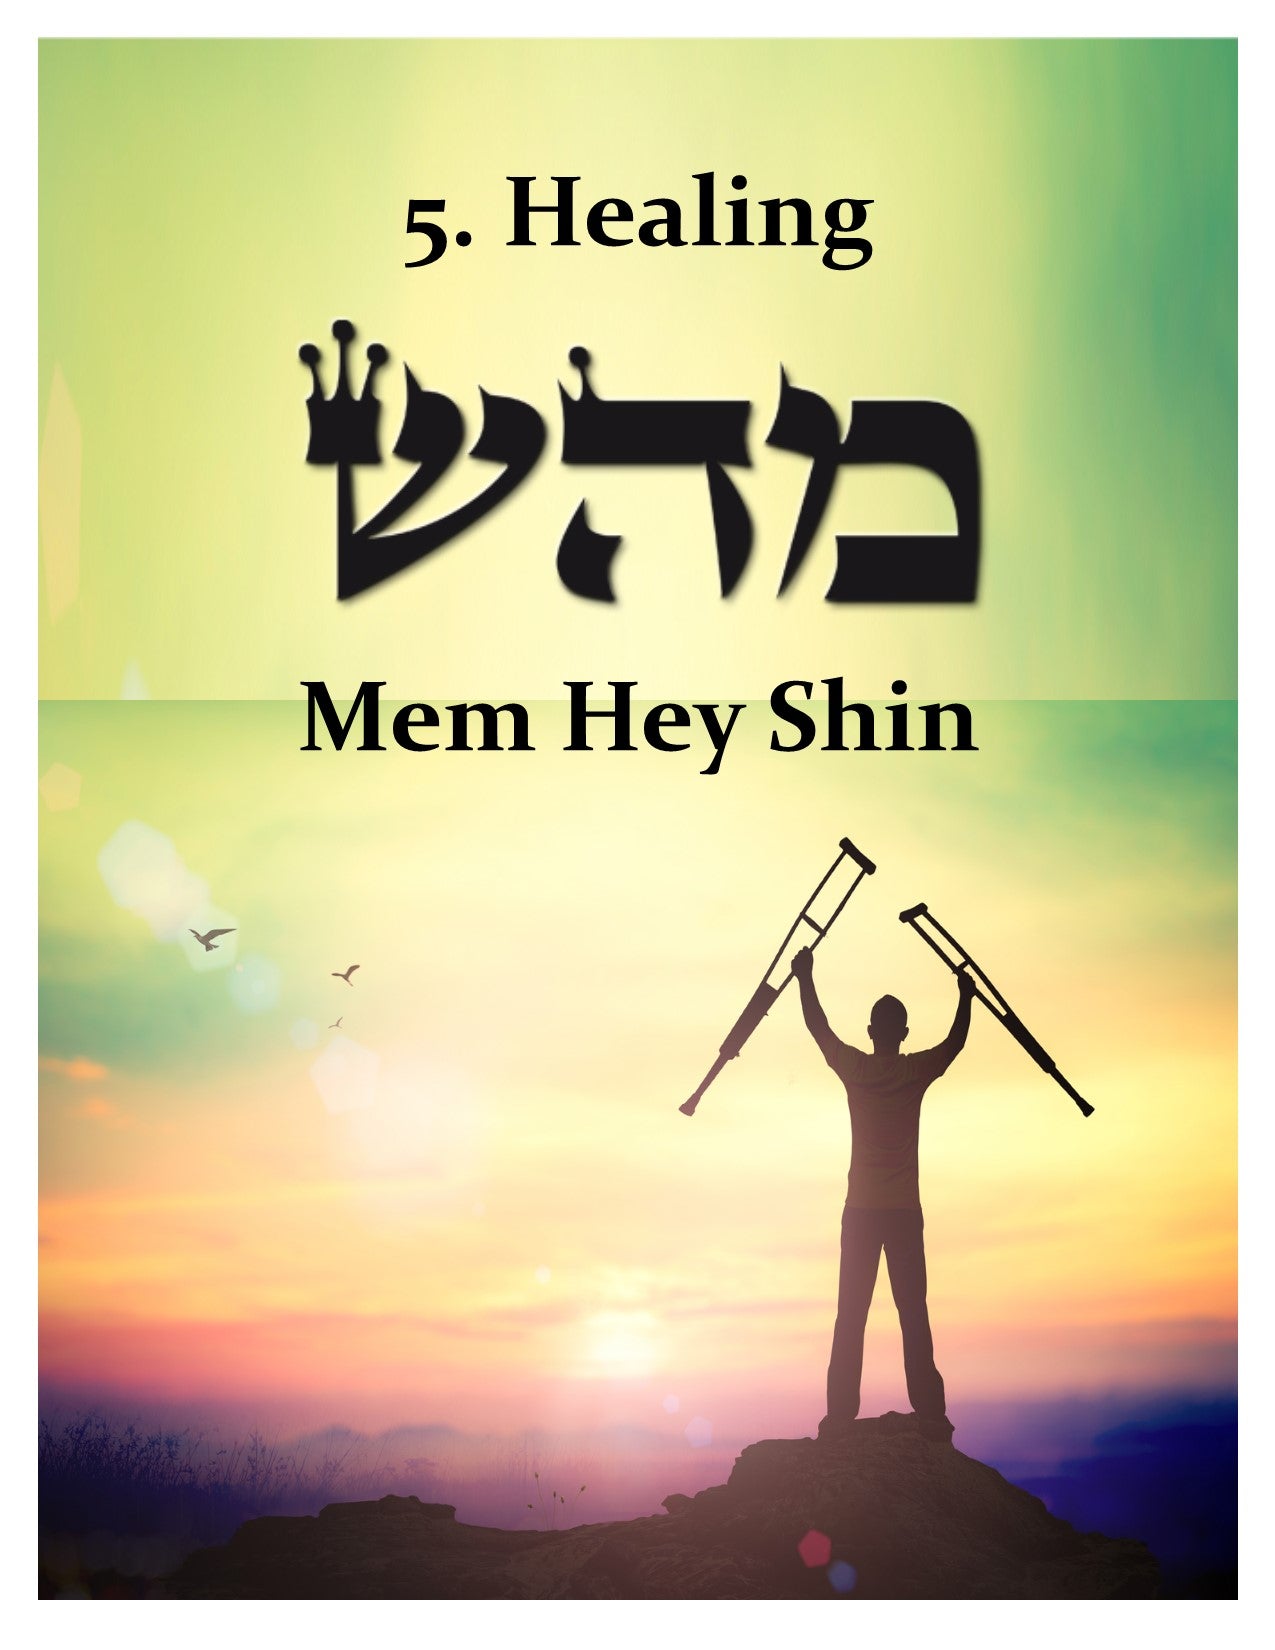 #5  Healing Tuning Fork from the 72 Names of God